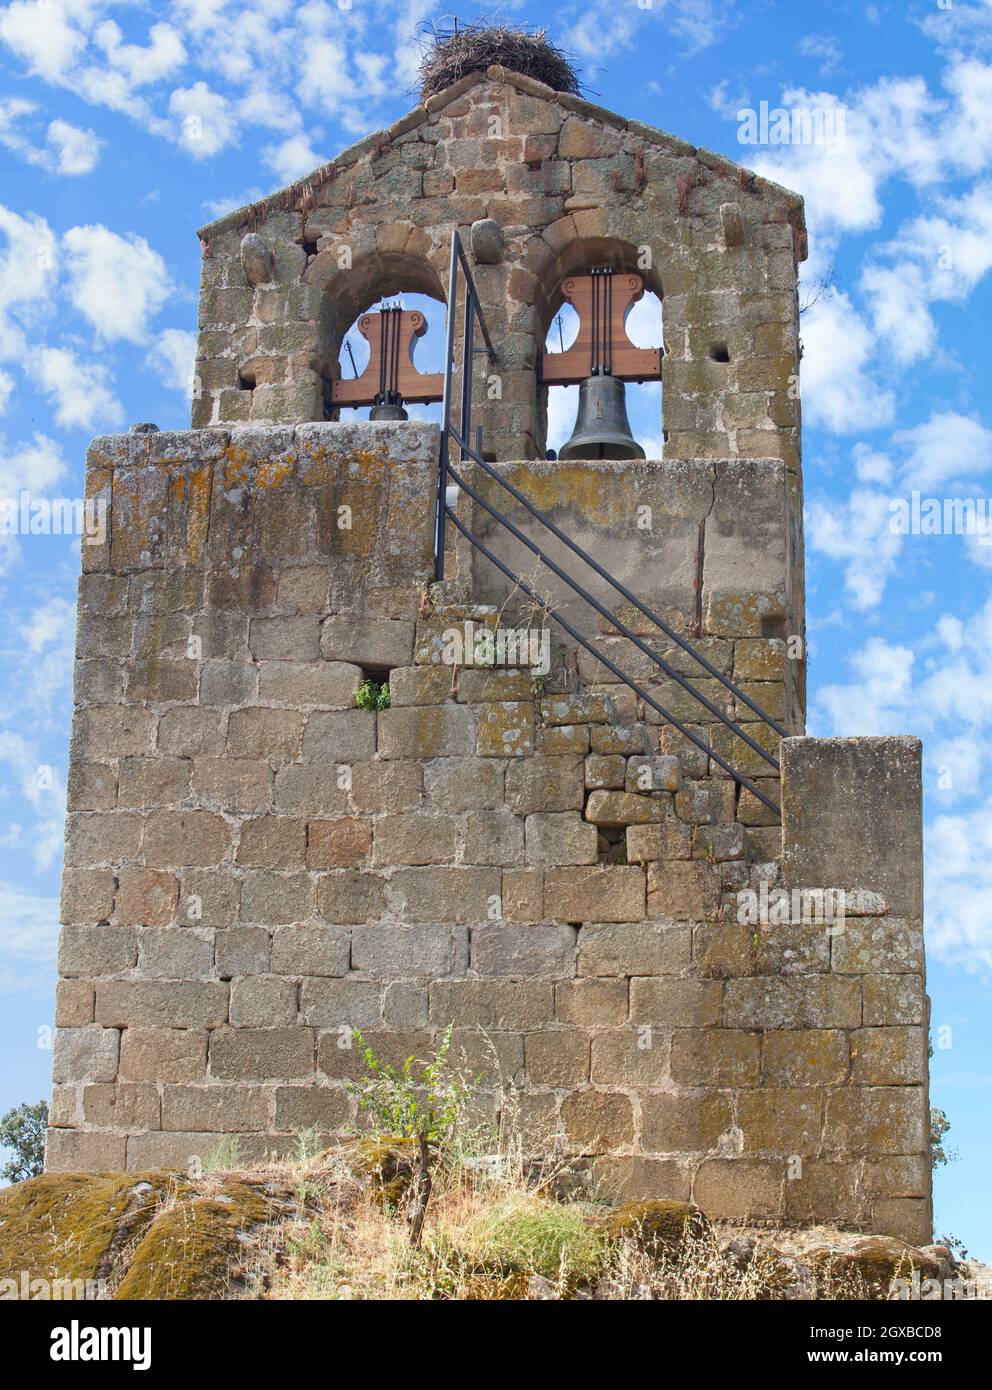 Isolated bell tower of Aceituna, Rural village in Algon Valley. Caceres, Extremadura, Spain. Stock Photo